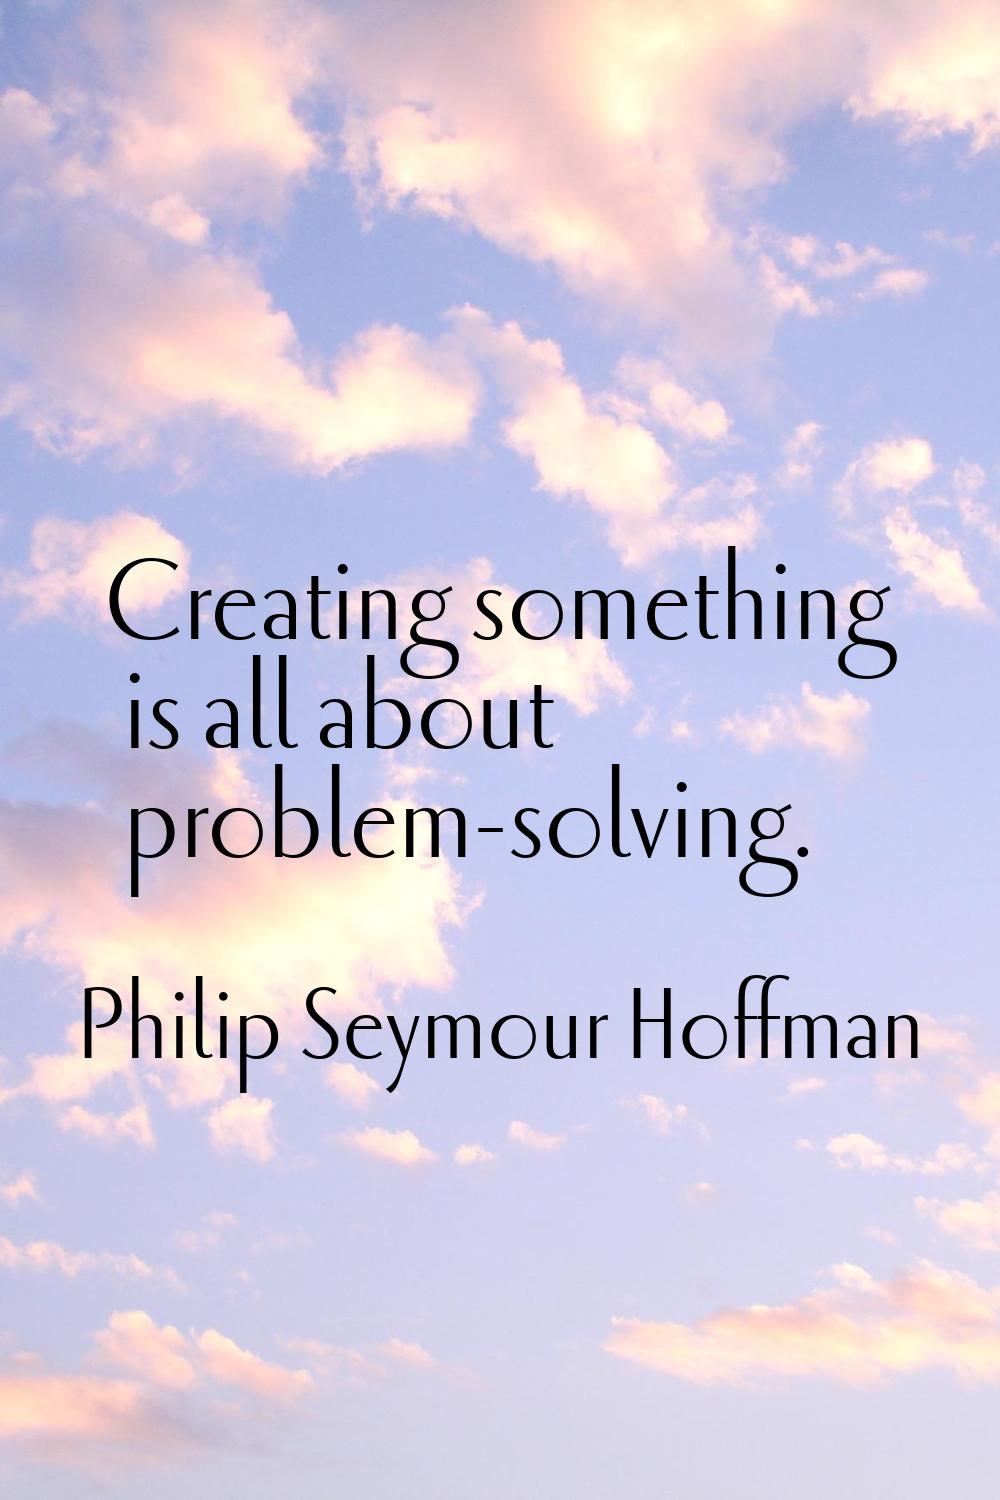 Creating something is all about problem-solving.